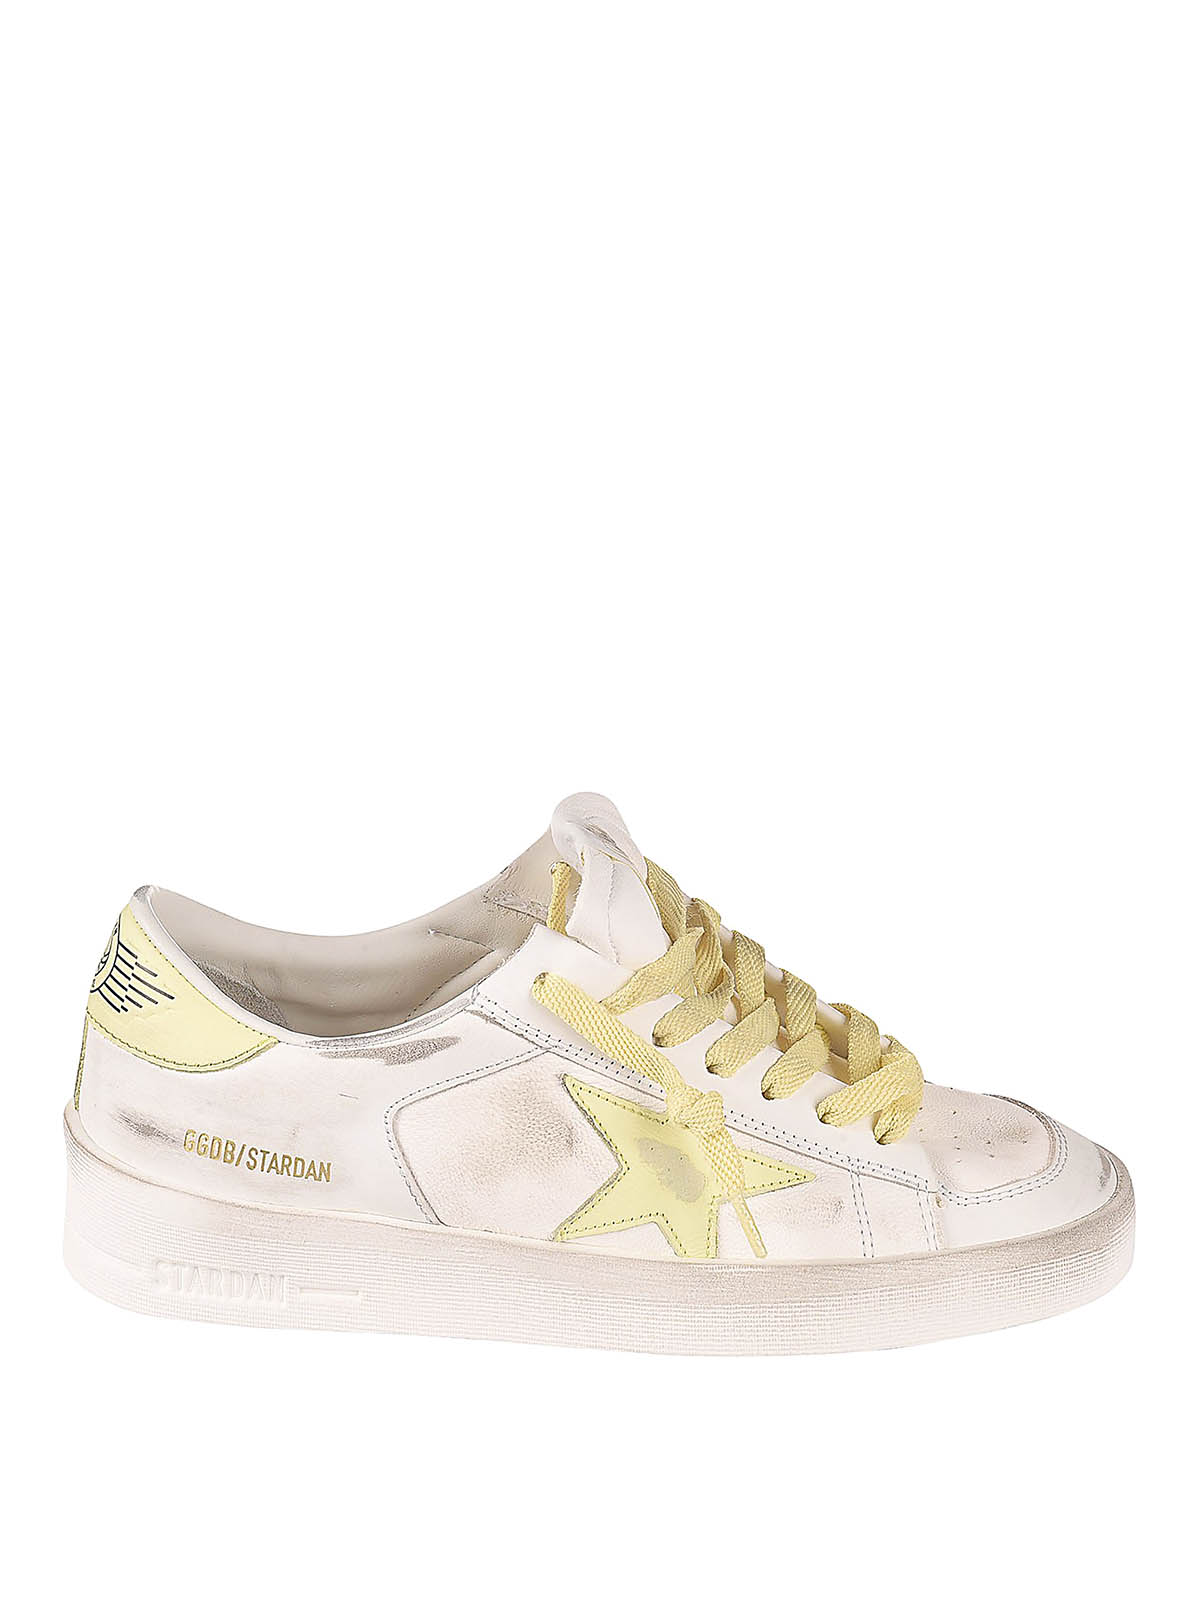 Trainers Golden Goose - Stardan sneakers - GWF00304F00269110957